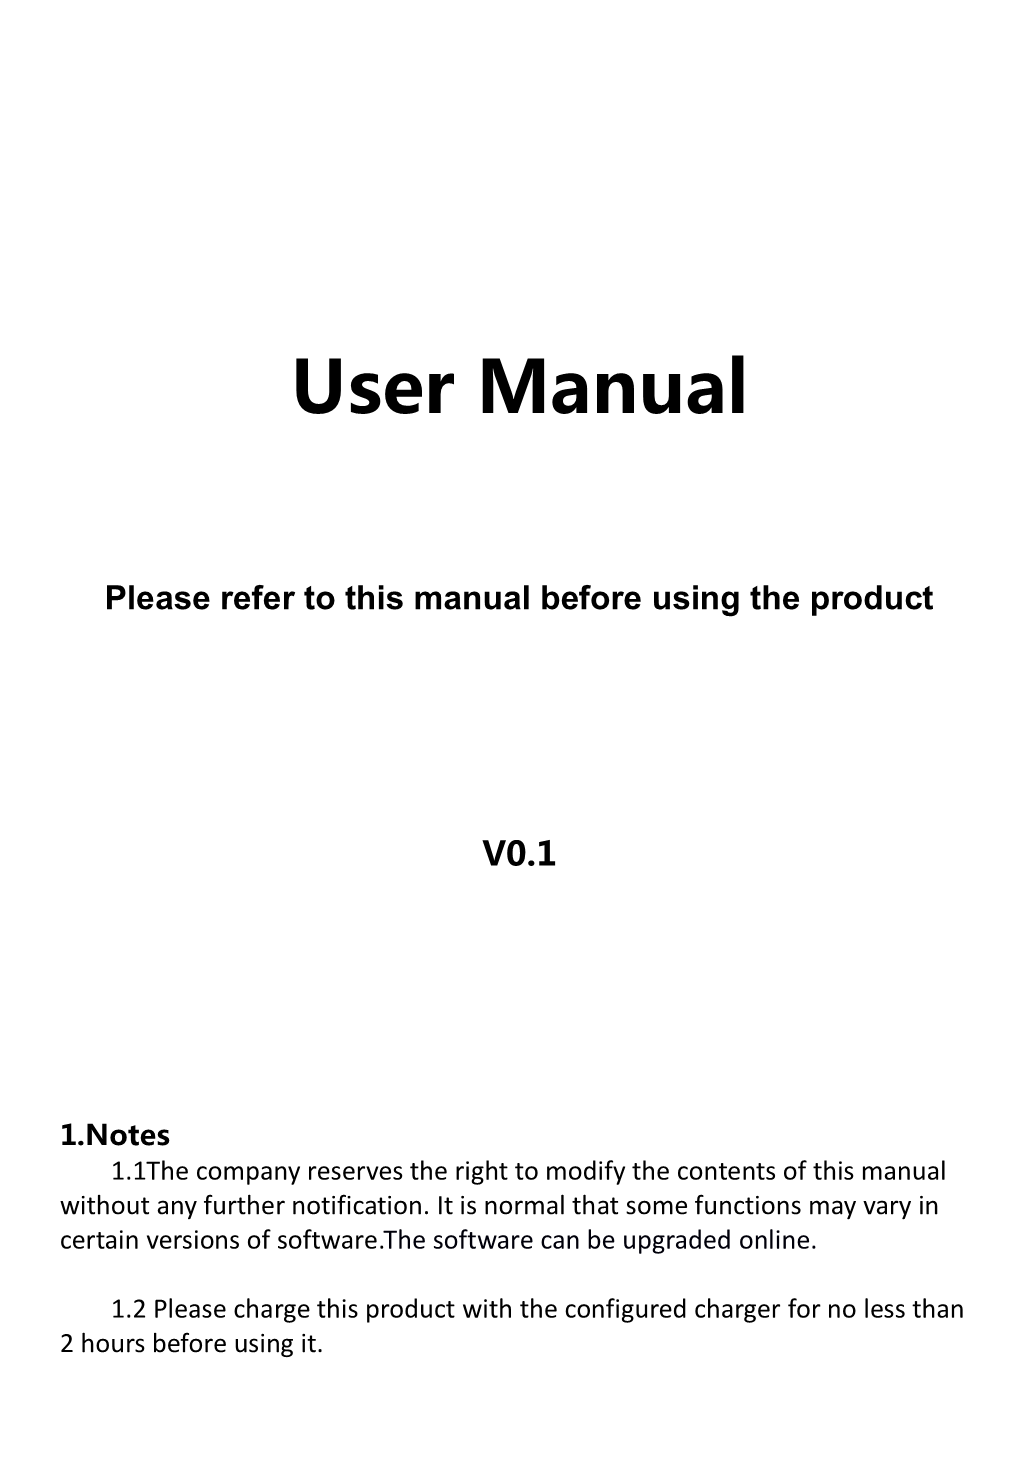 Please Refer to This Manual Before Using the Product